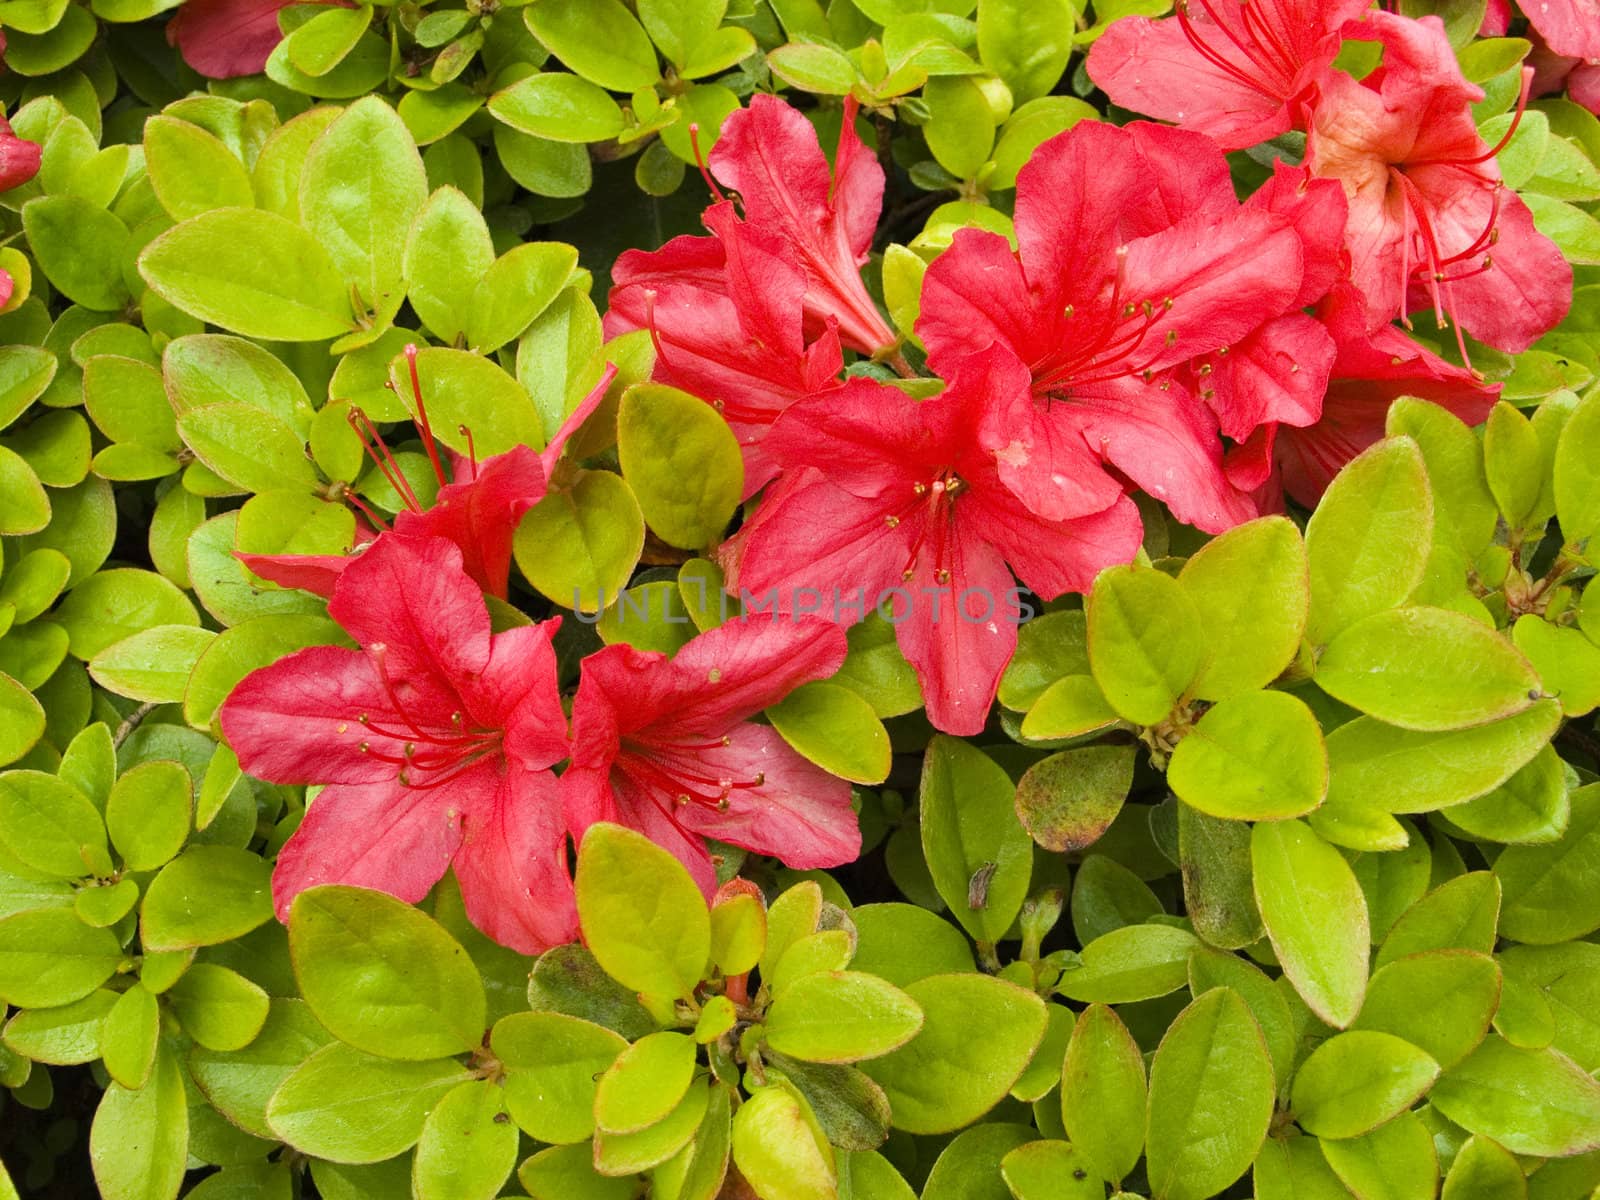 rhododendron (azalea) flowers and bush background